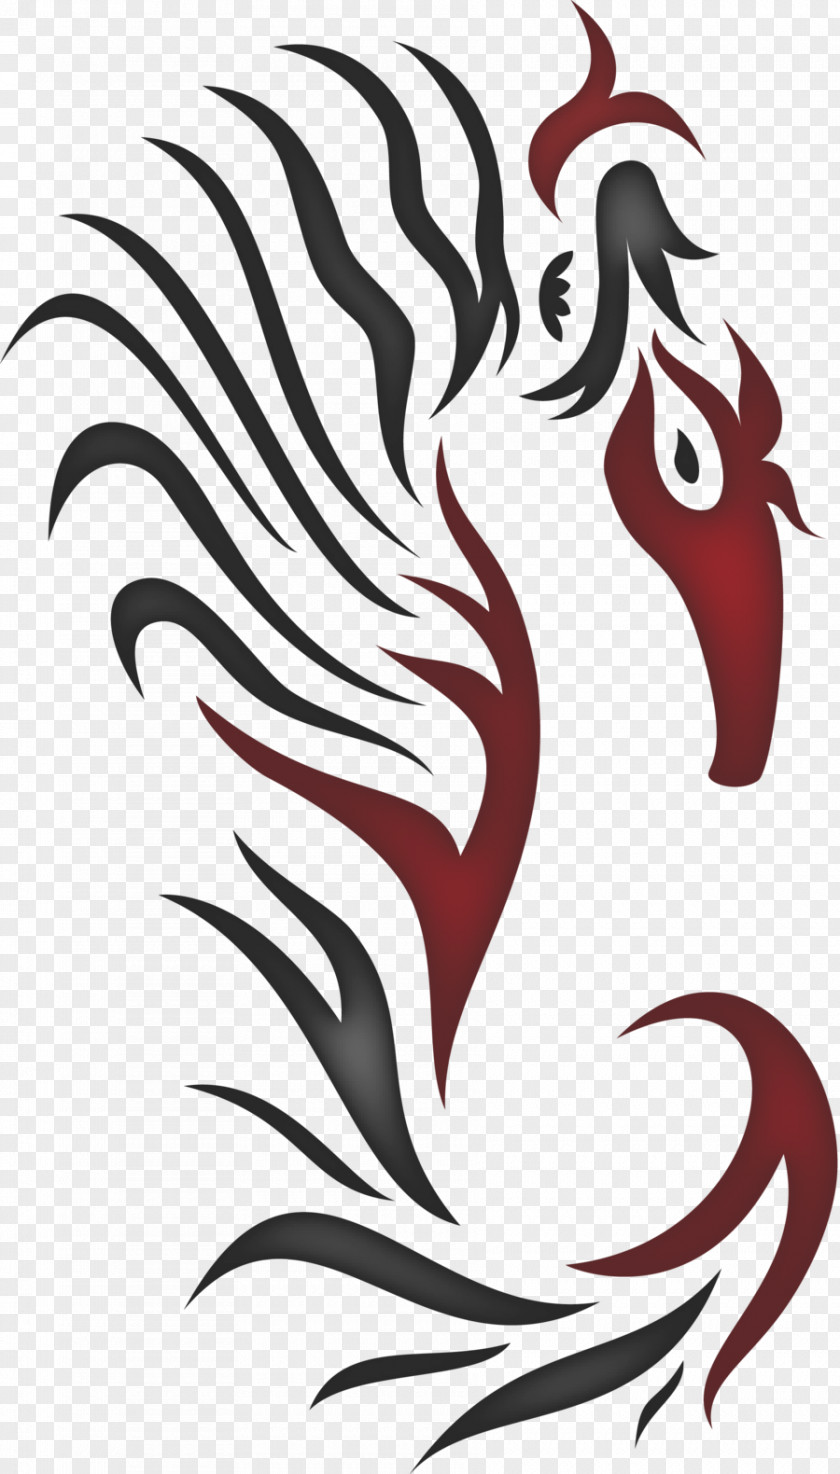 Seahorse Drawing Tattoo Ink Image Design PNG